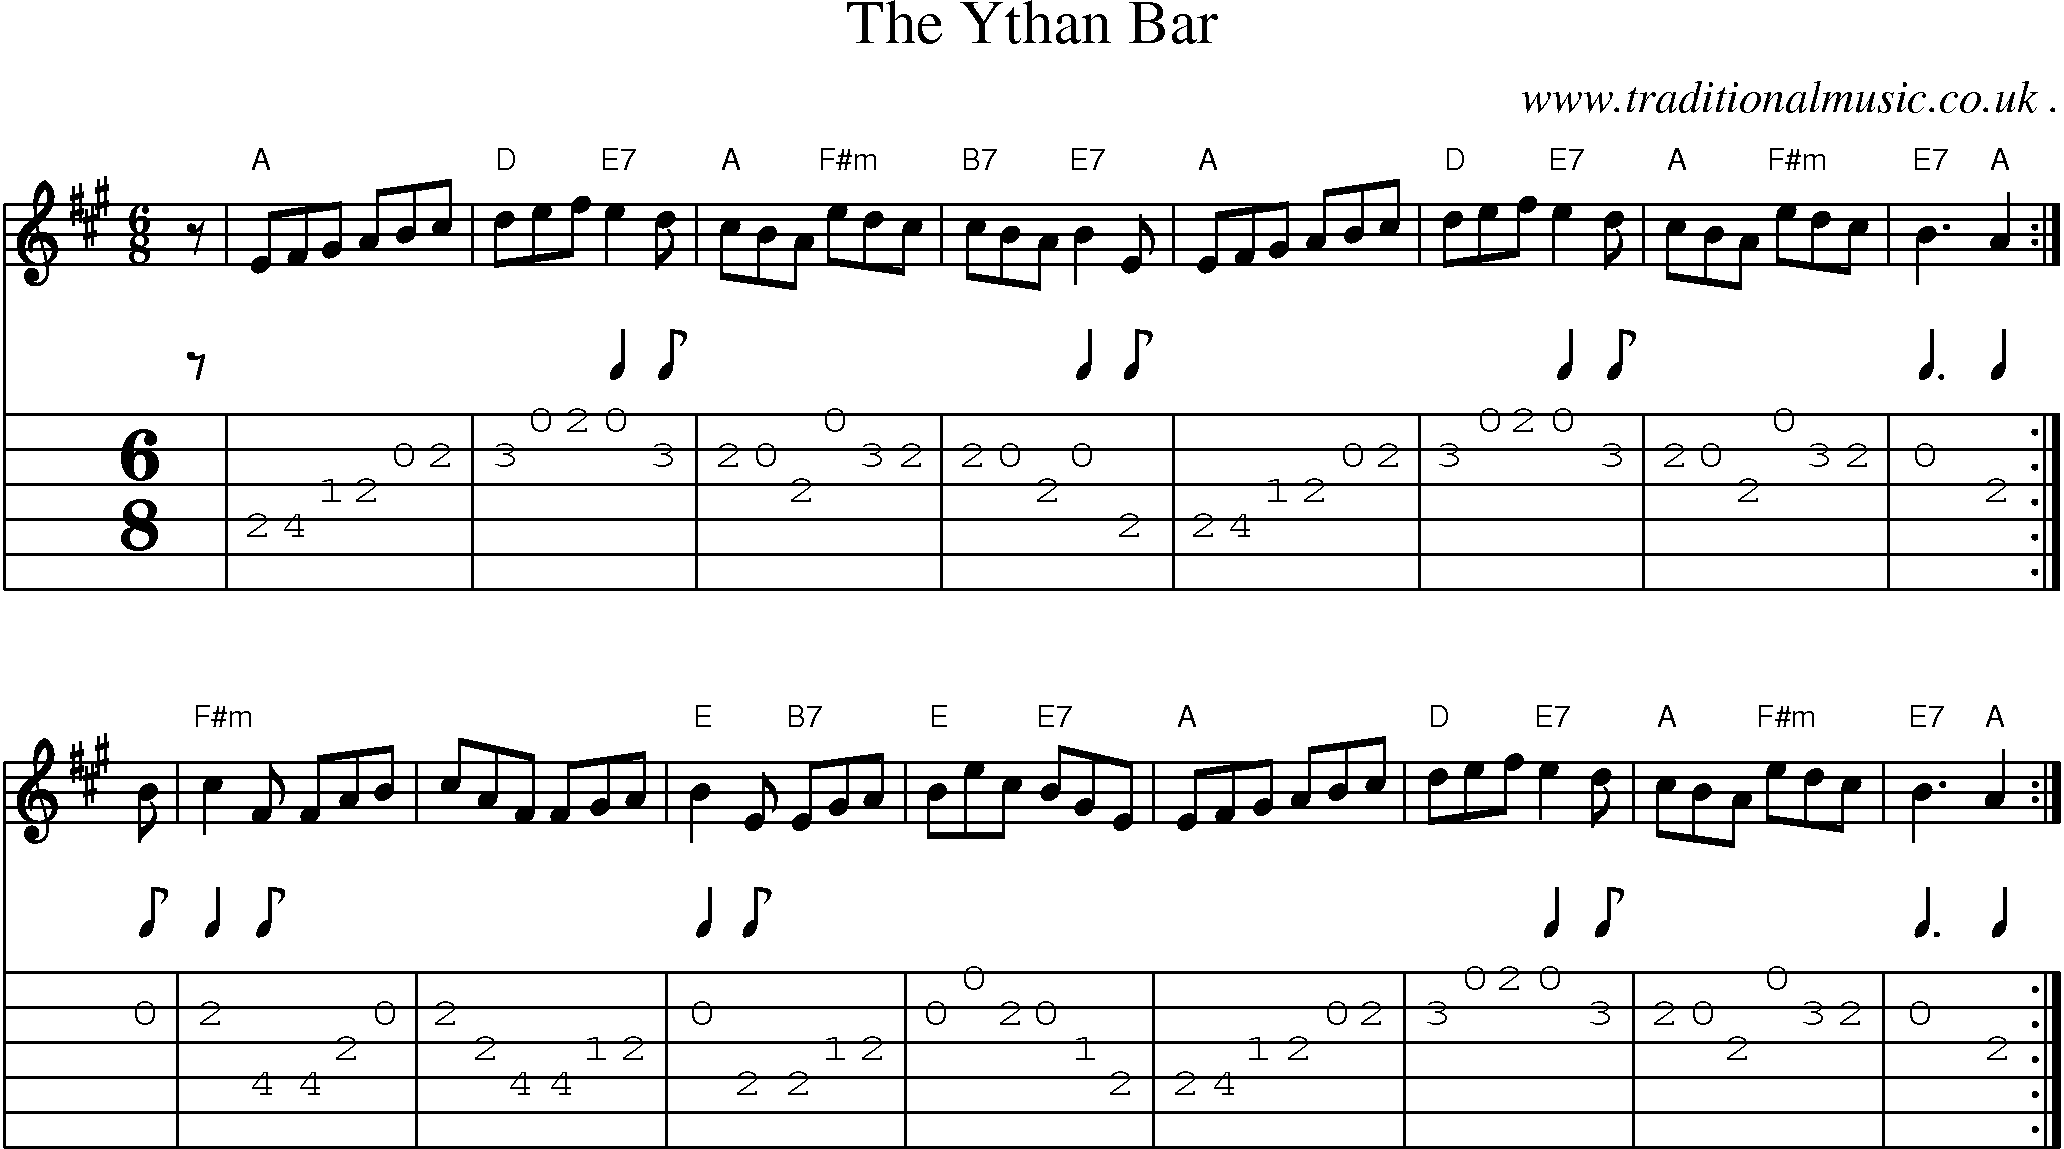 Sheet-music  score, Chords and Guitar Tabs for The Ythan Bar